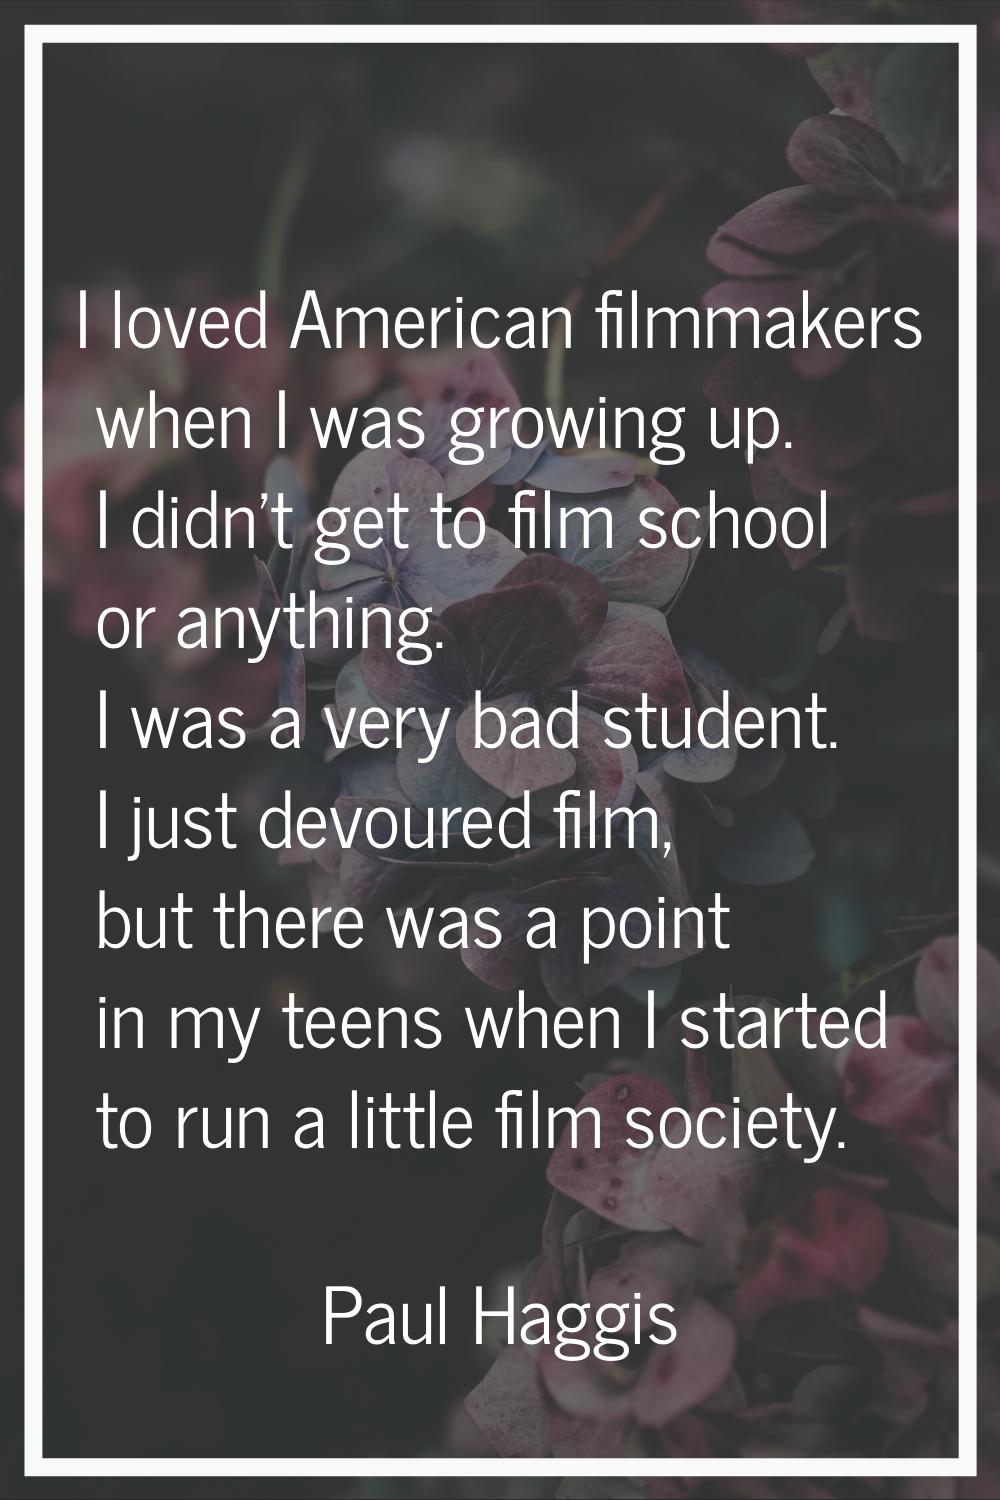 I loved American filmmakers when I was growing up. I didn't get to film school or anything. I was a